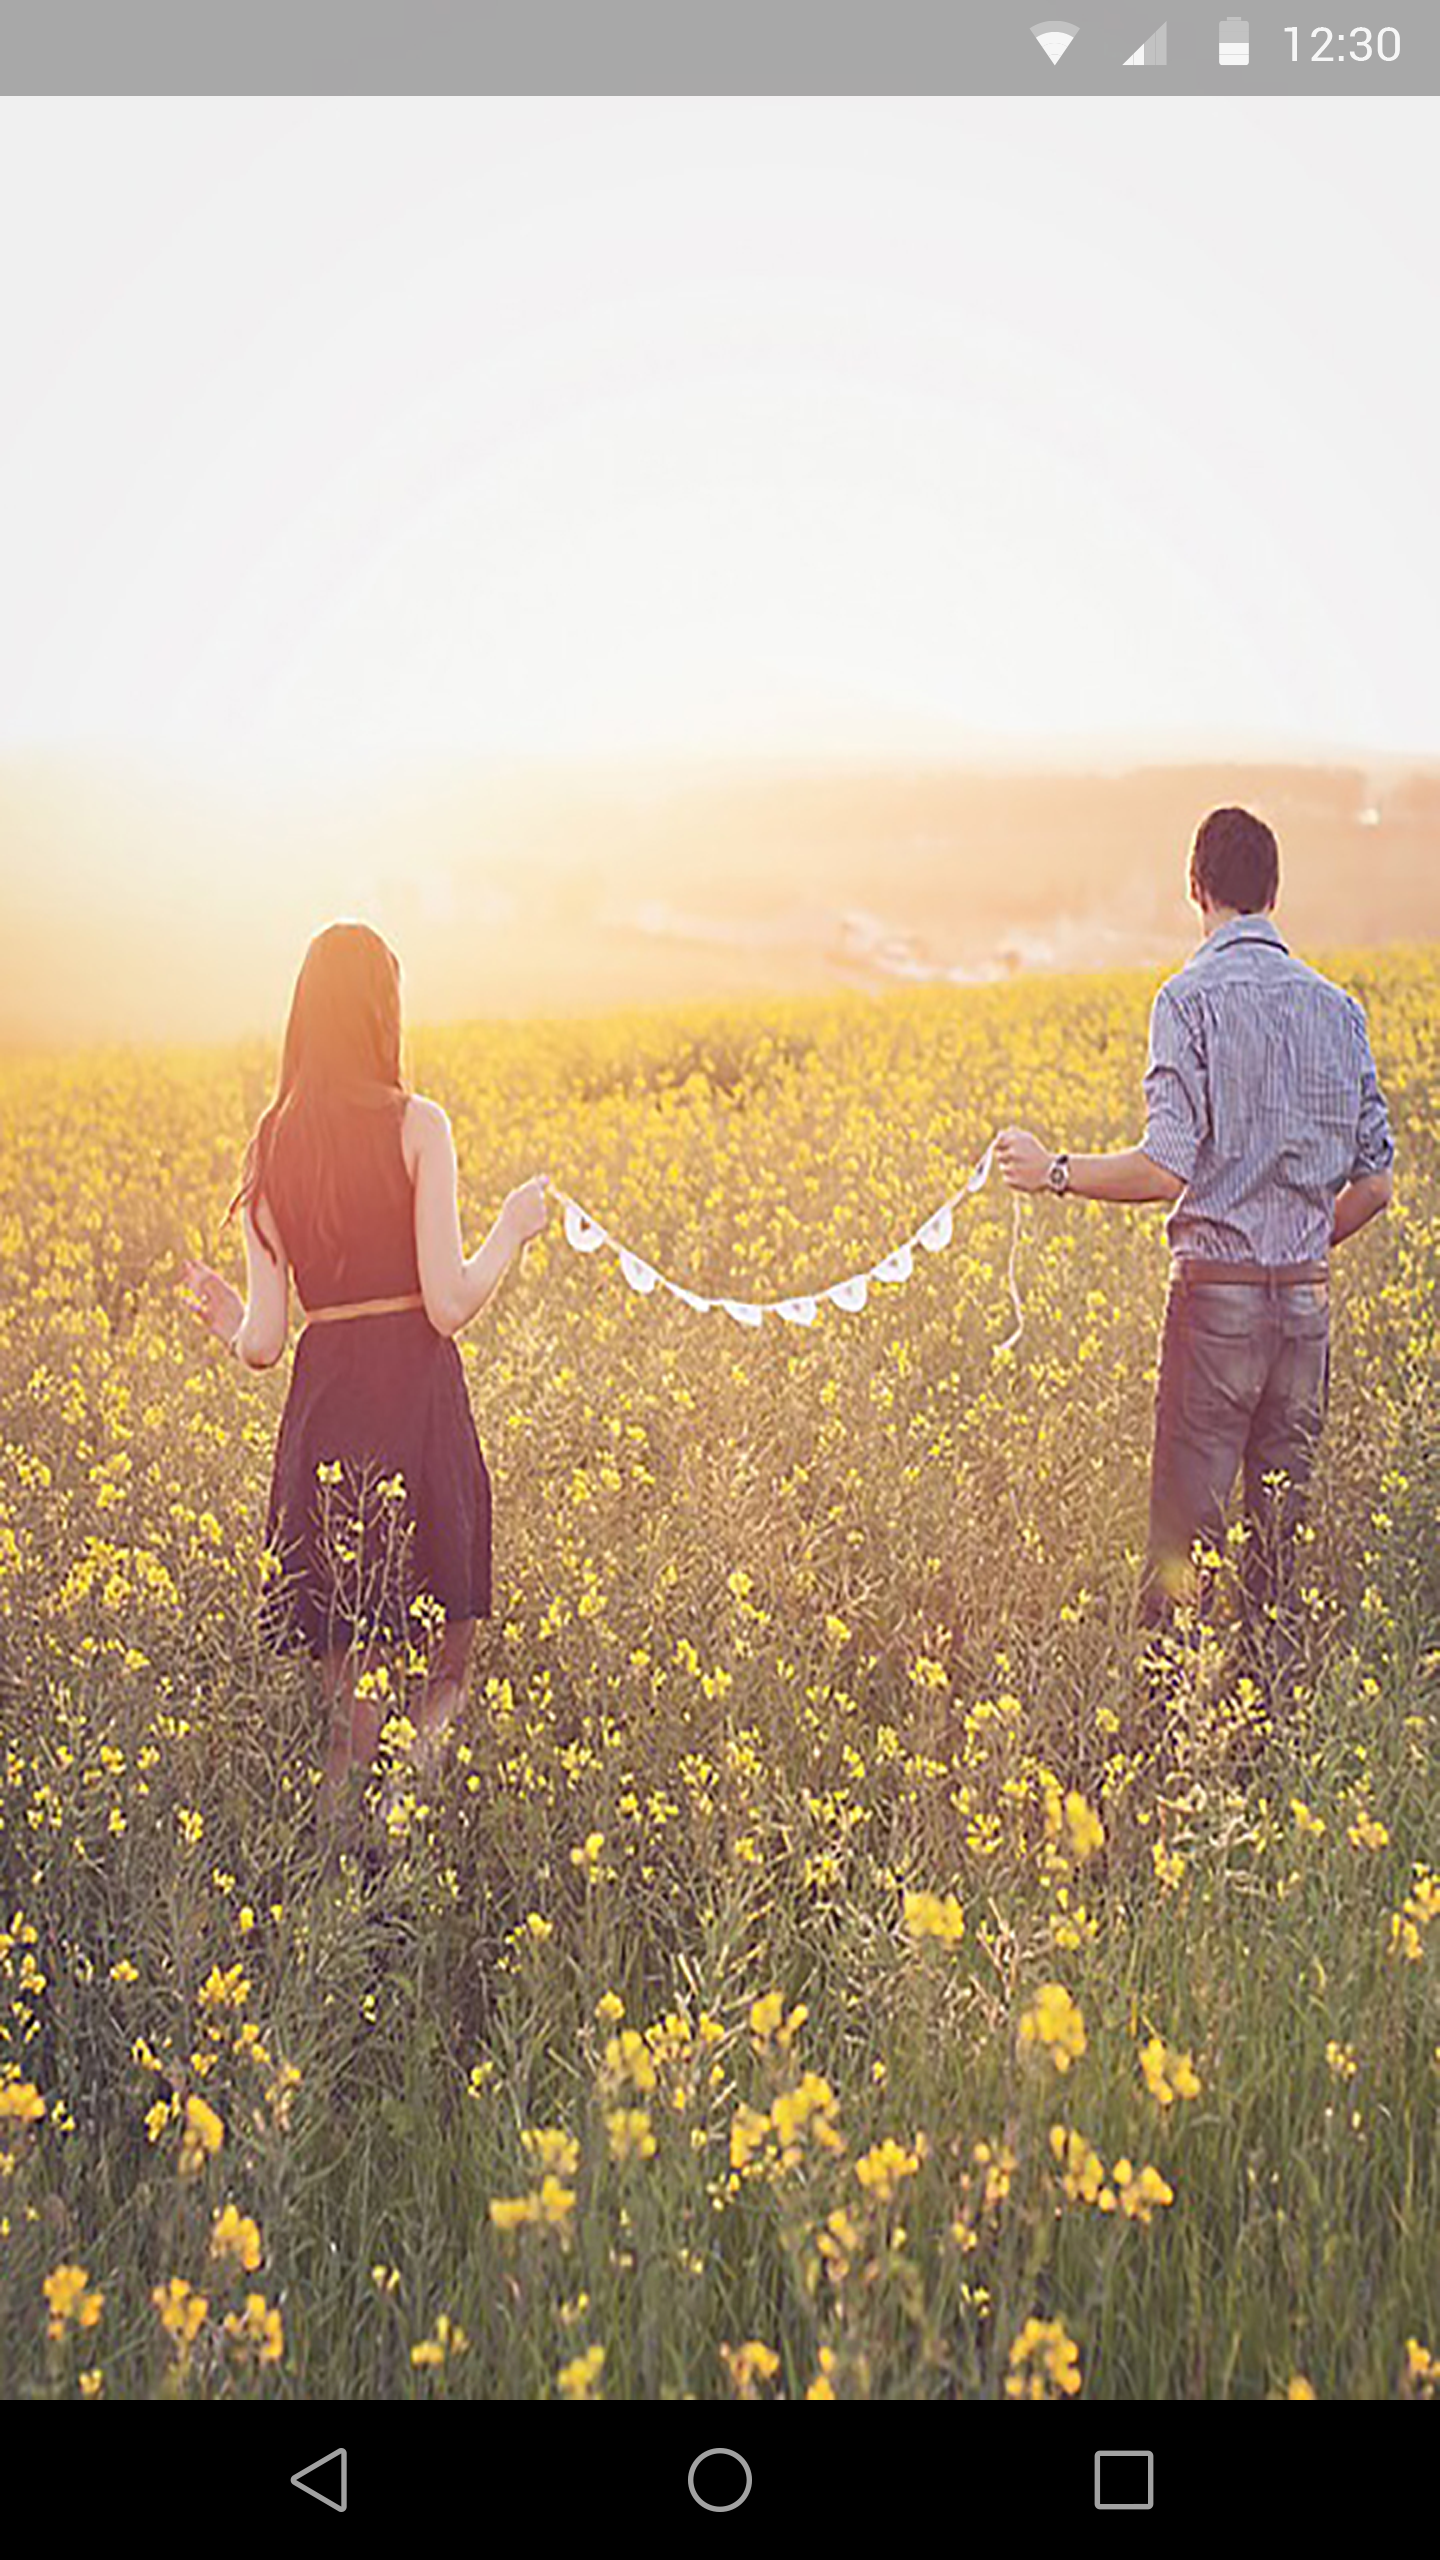 live wallpaper love couple,people in nature,nature,photograph,meadow,field